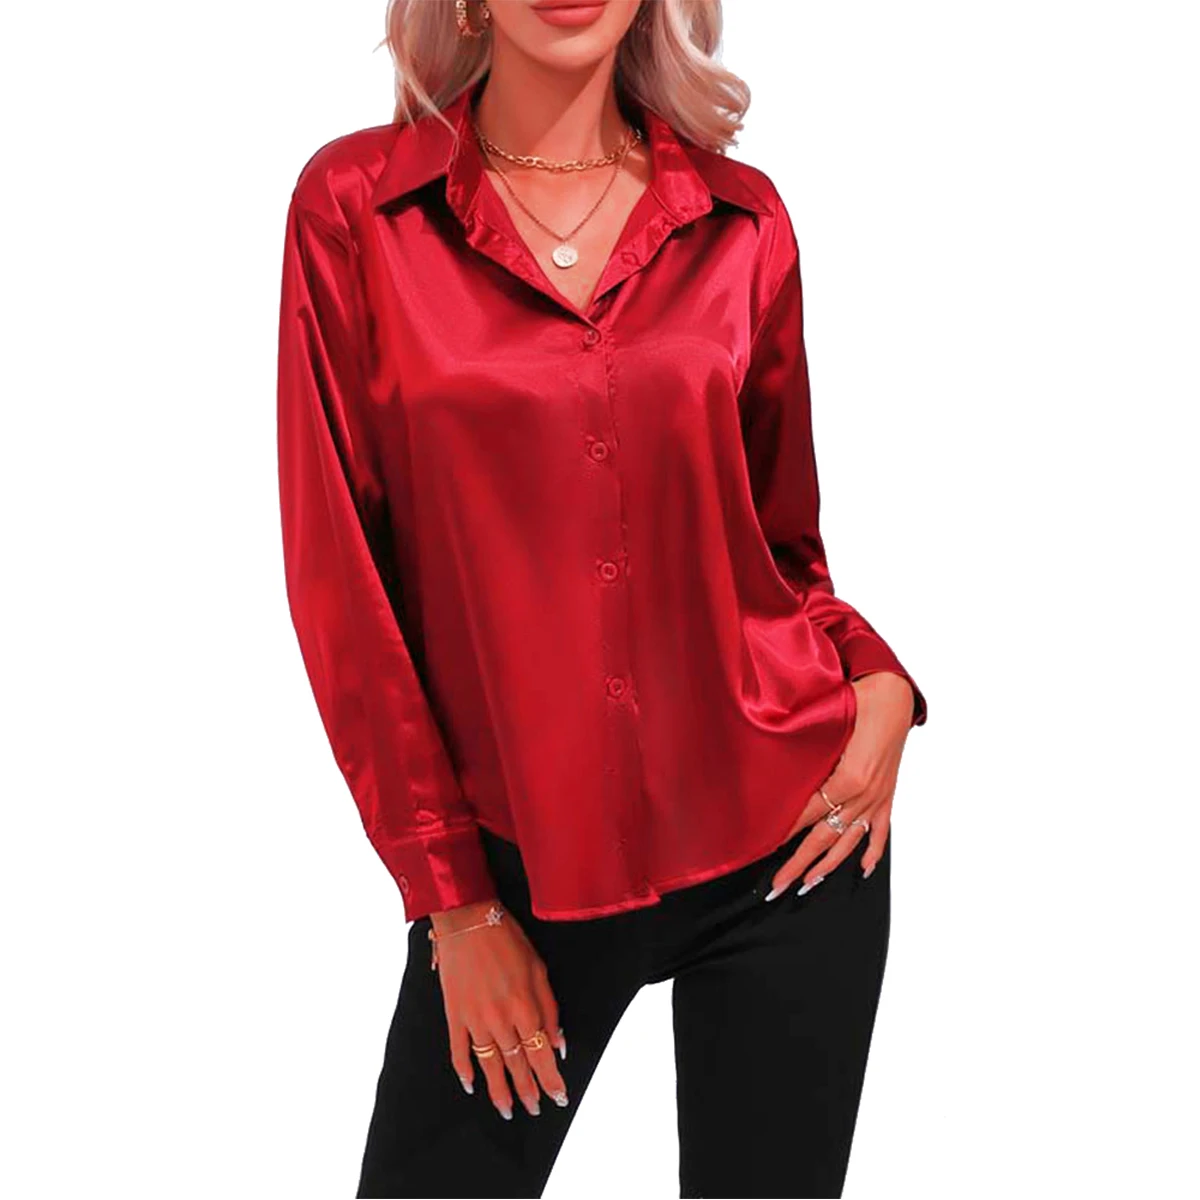 Oversize Women Shirts Silk Solid Plain Red White Black Green Blue Pink Yellow Purple Blouses Long Sleeve Tops Barry Wang aesthetic blazers newspapers pattern print single button suits women indie black white woman oversize fashion loose blazers new